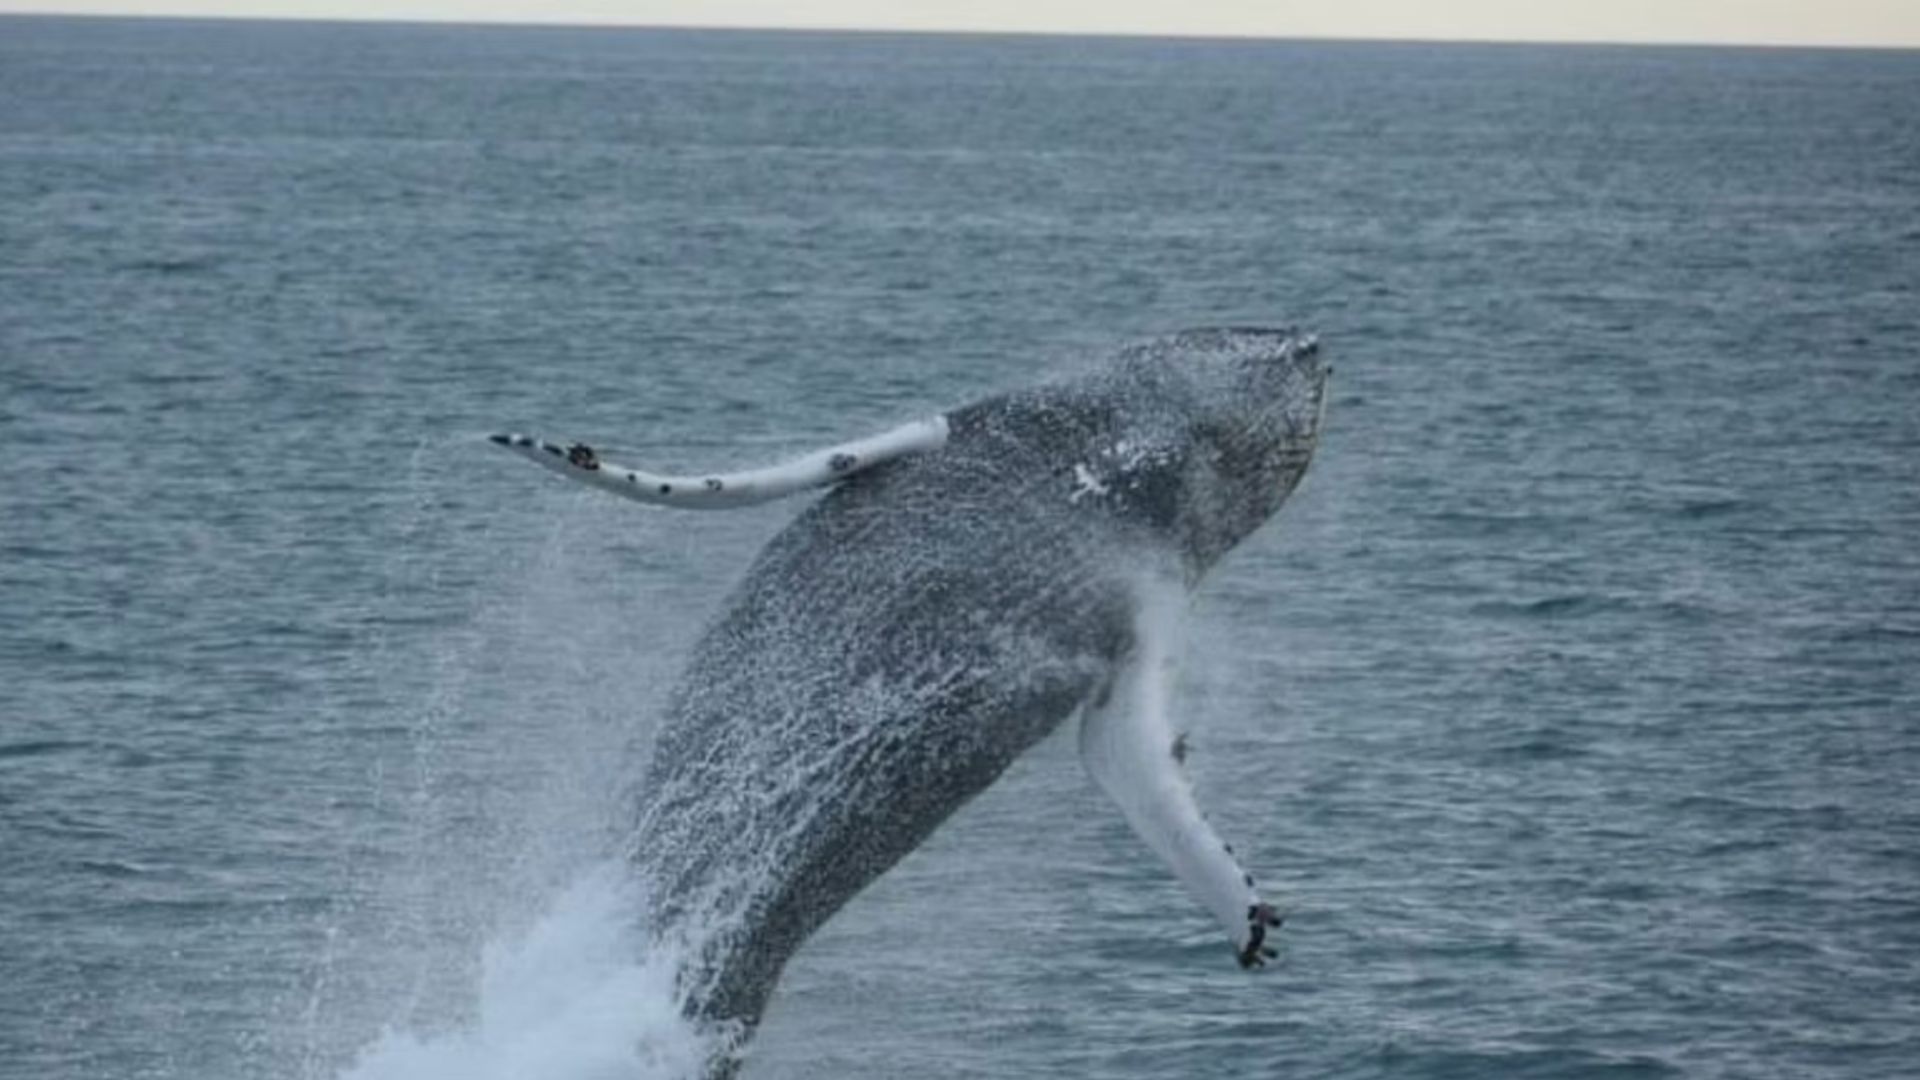 Whale is jumping, Iceland